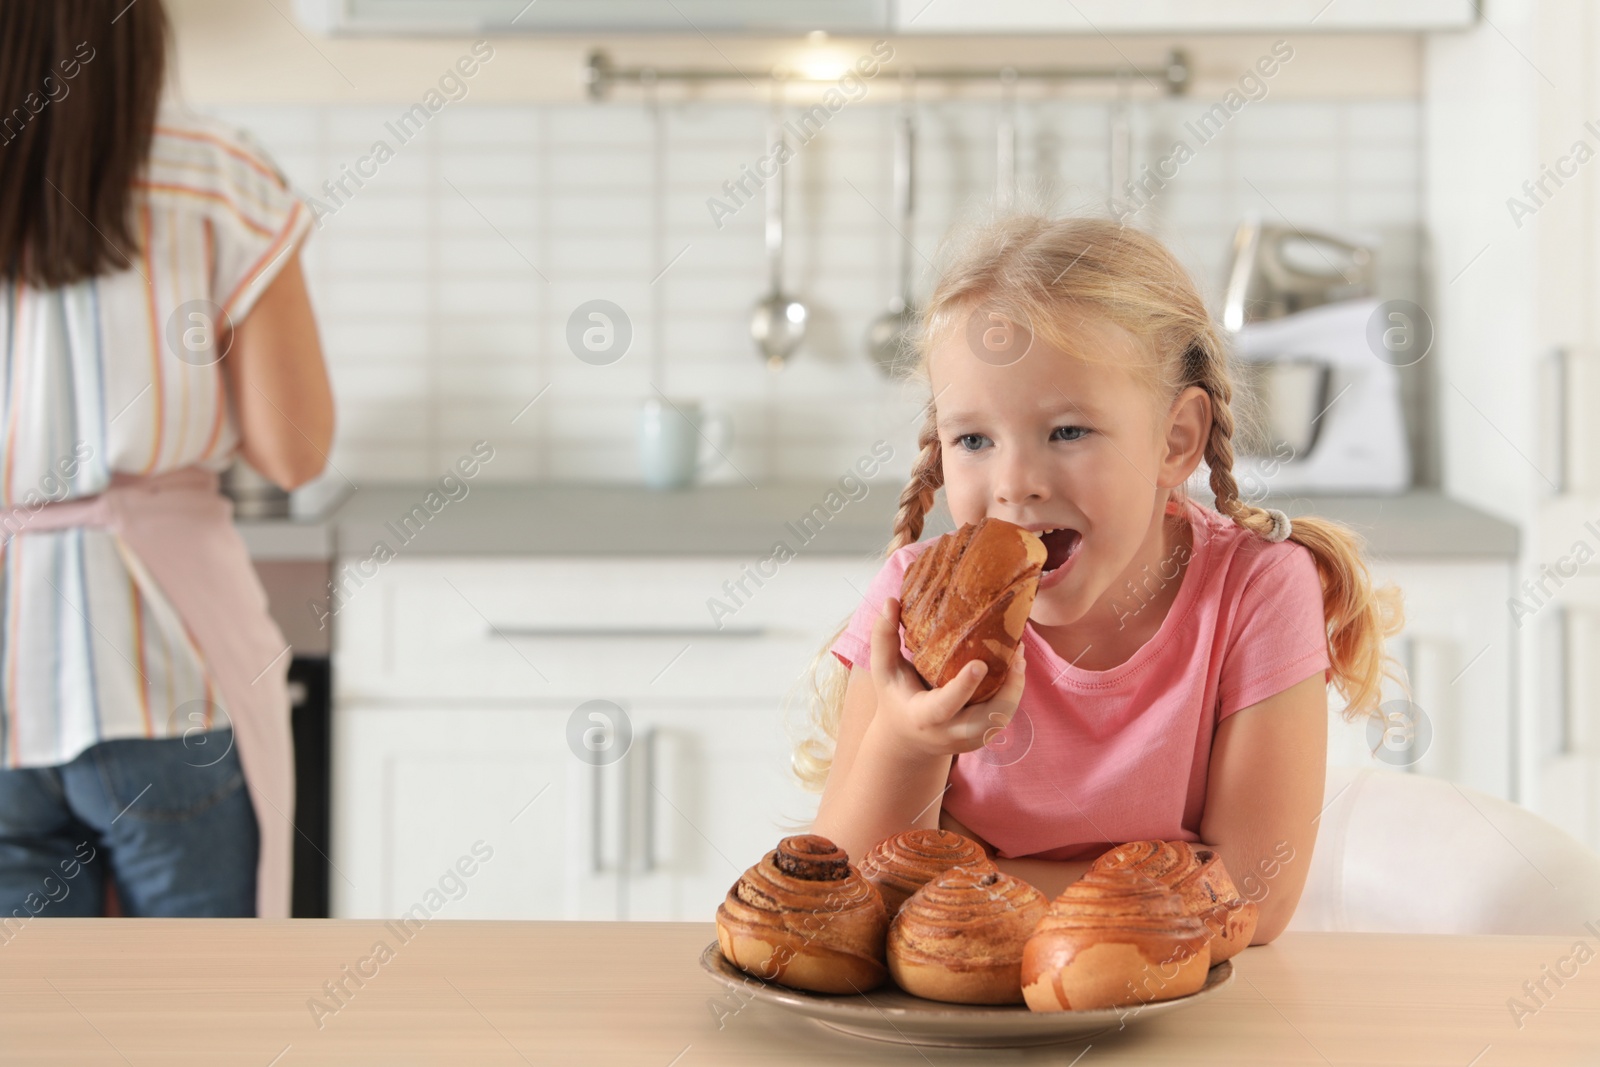 Photo of Little girl eating freshly oven baked buns in kitchen. Space for text